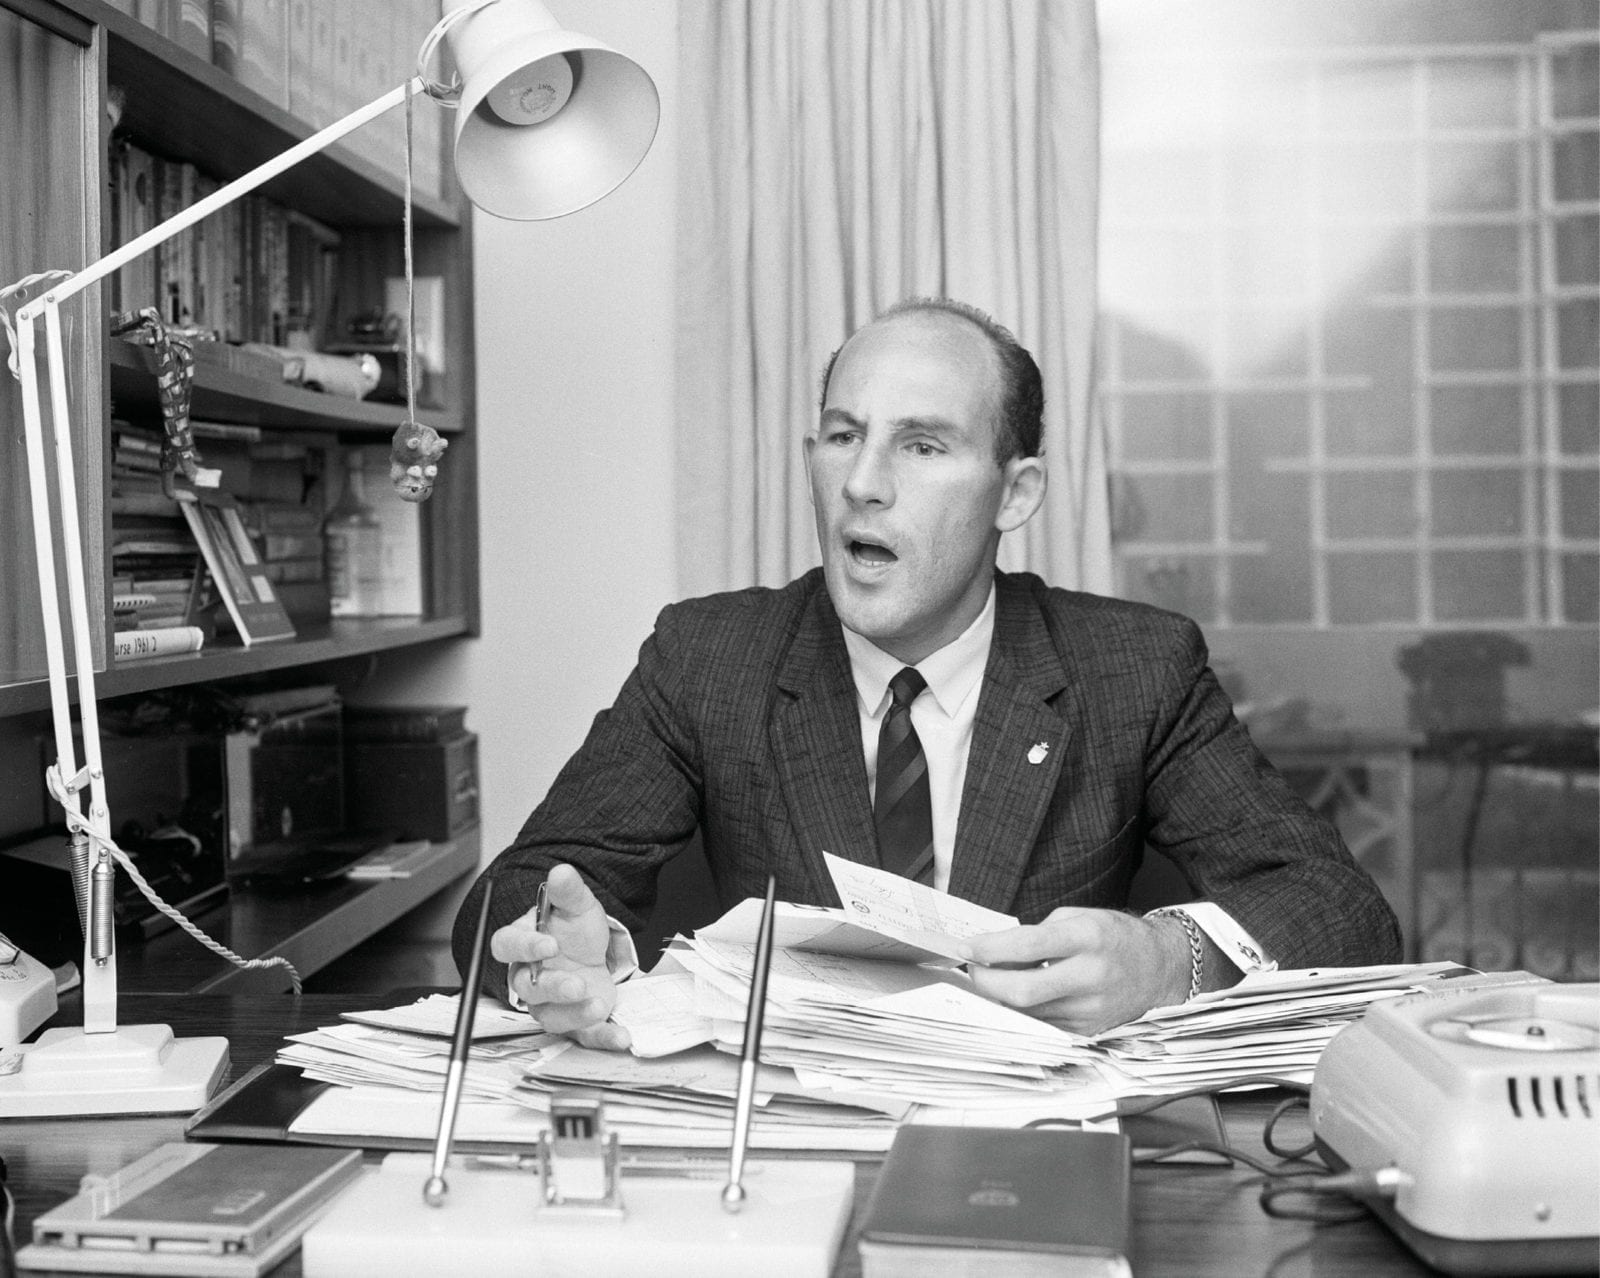 Stirling Moss in his office not long after his Goodwood crash in 1962